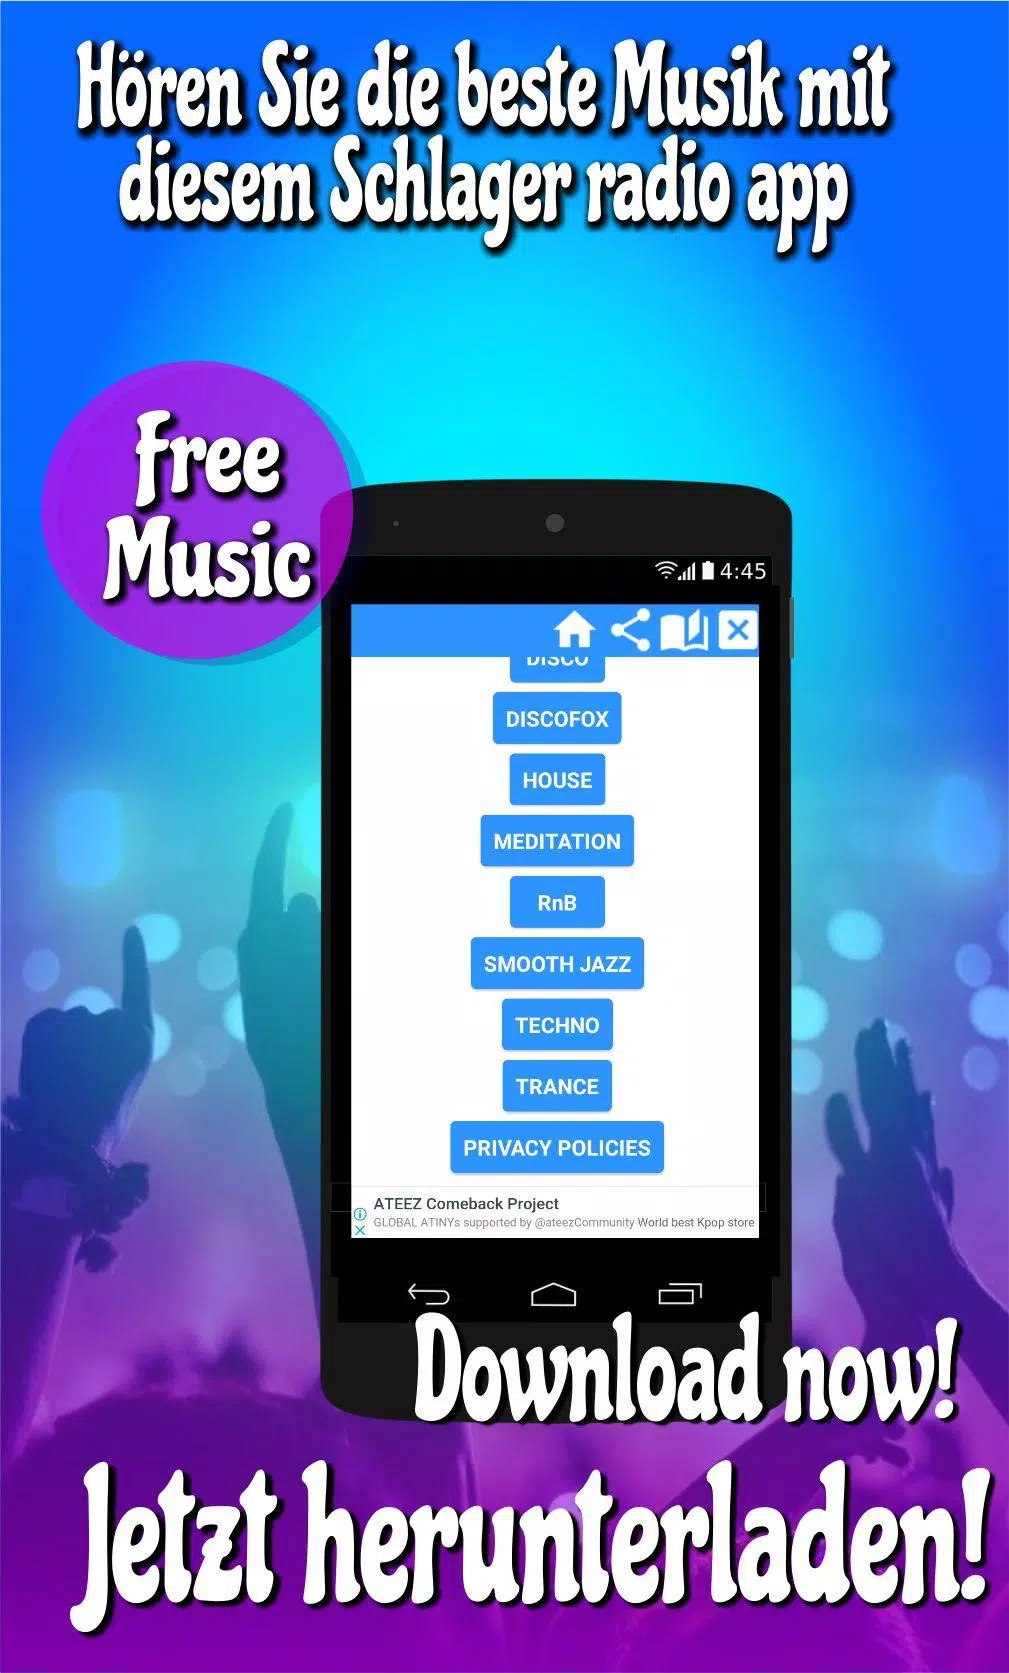 Schlager radio Schlager musik for Android - APK Download